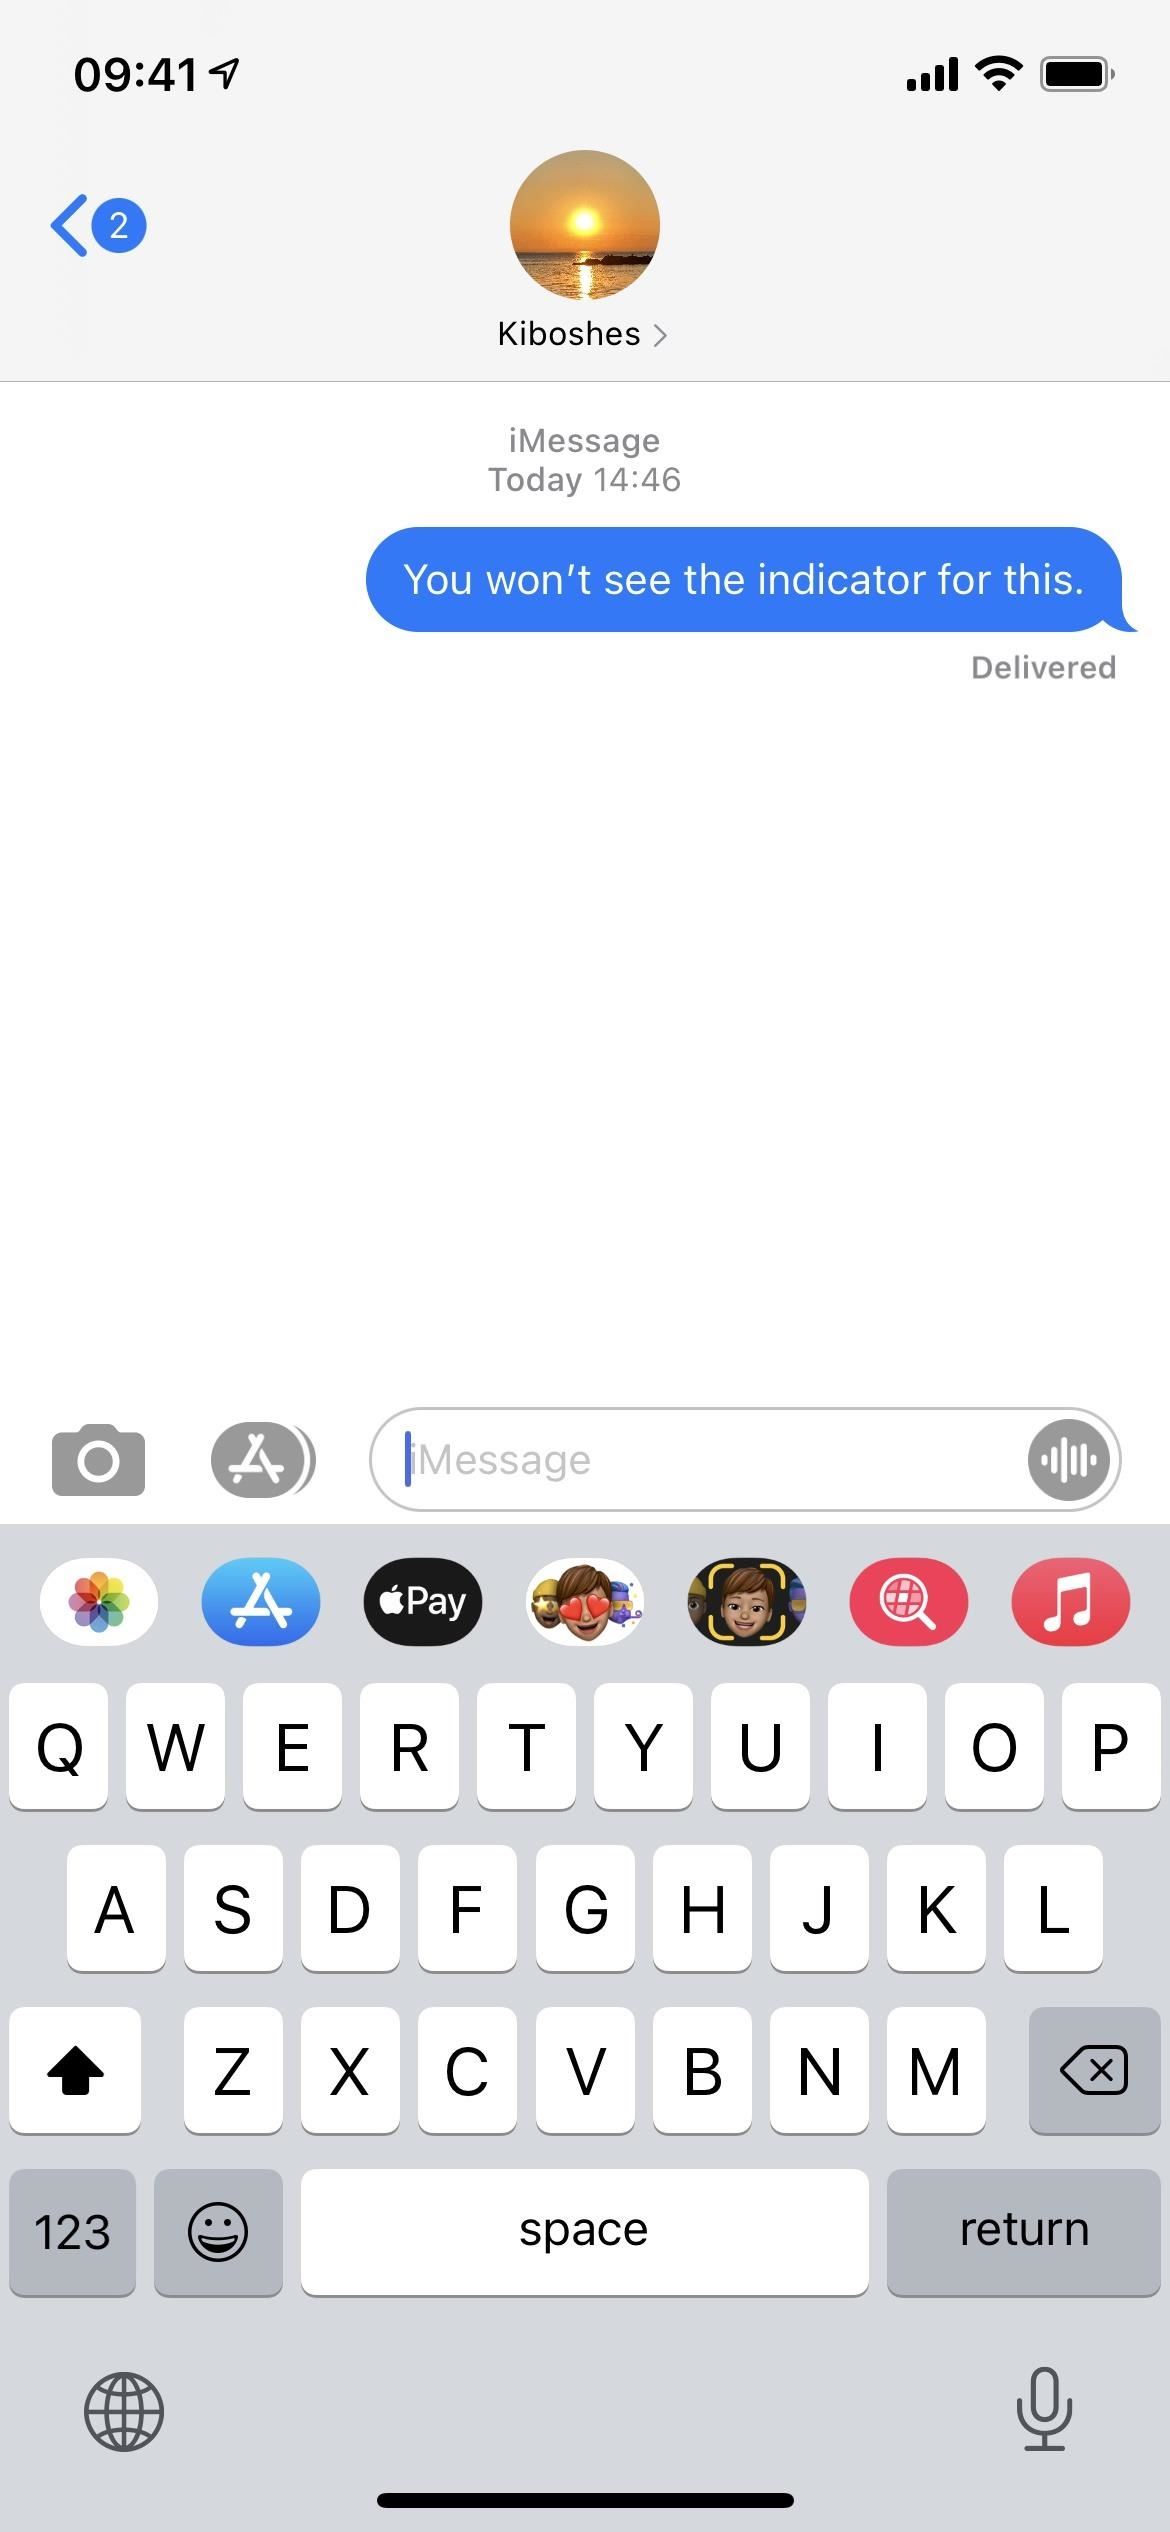 How to Disable the iMessage Typing Bubble Indicator So Others Don't Know You're Currently Active in the Chat